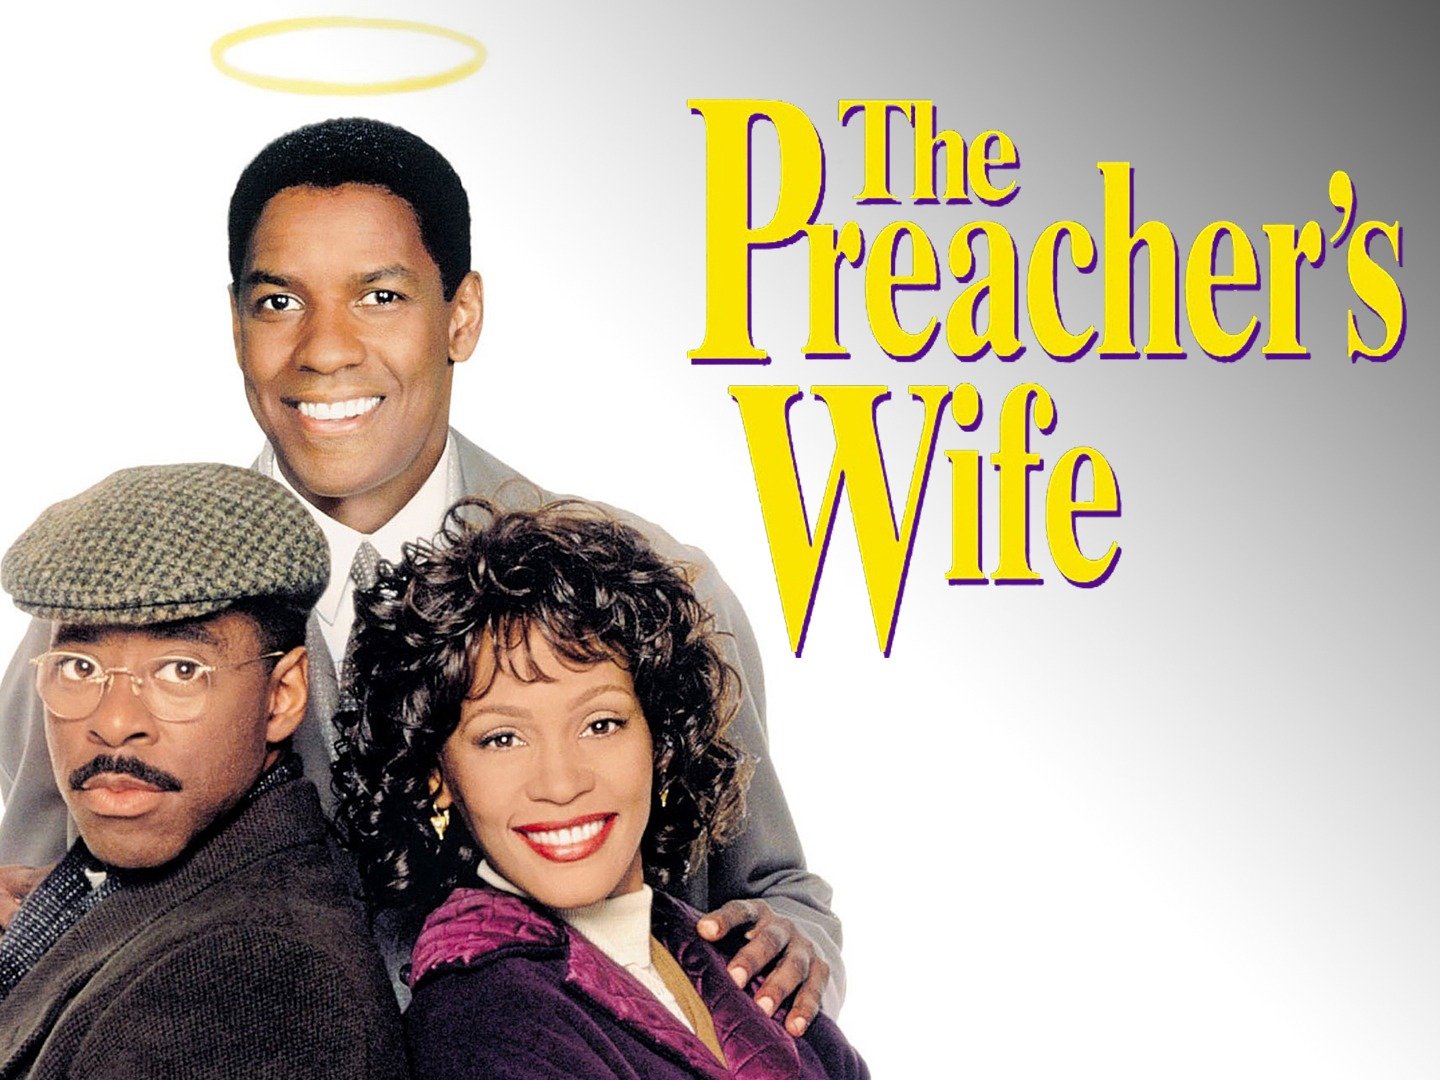 The Preachers Wife pic